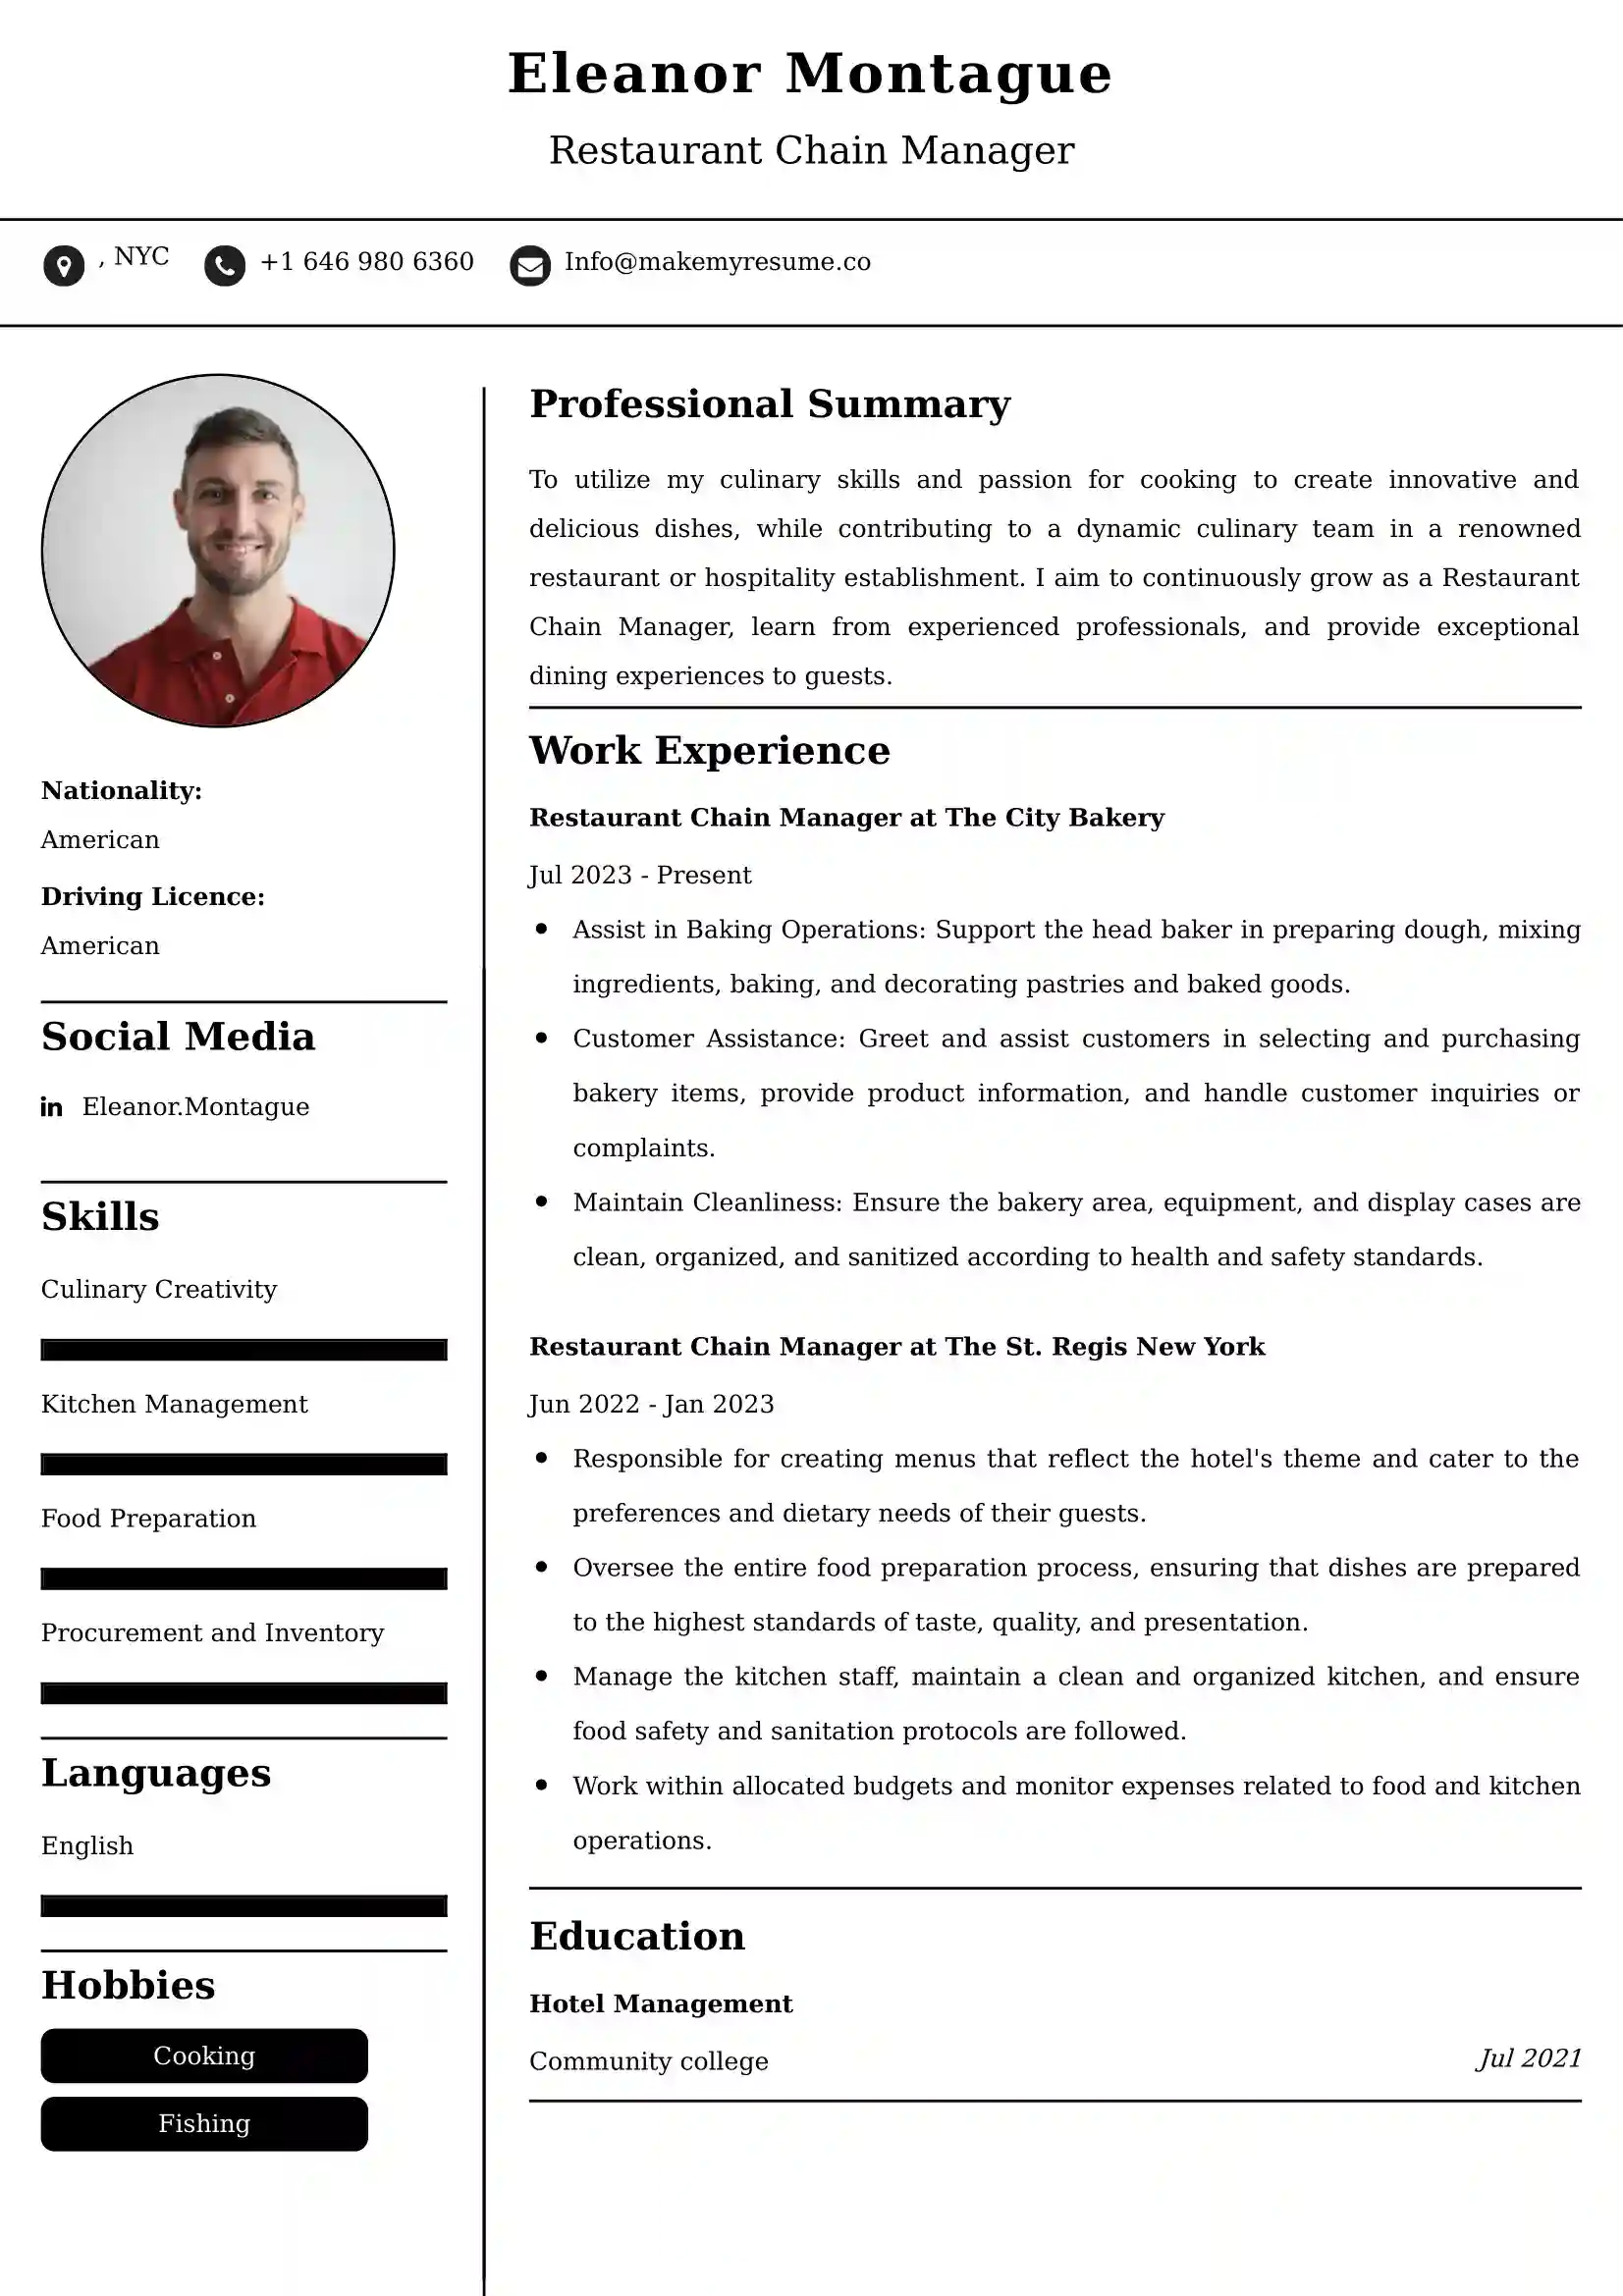 Restaurant Chain Manager Resume Examples - UK Format, Latest Template.